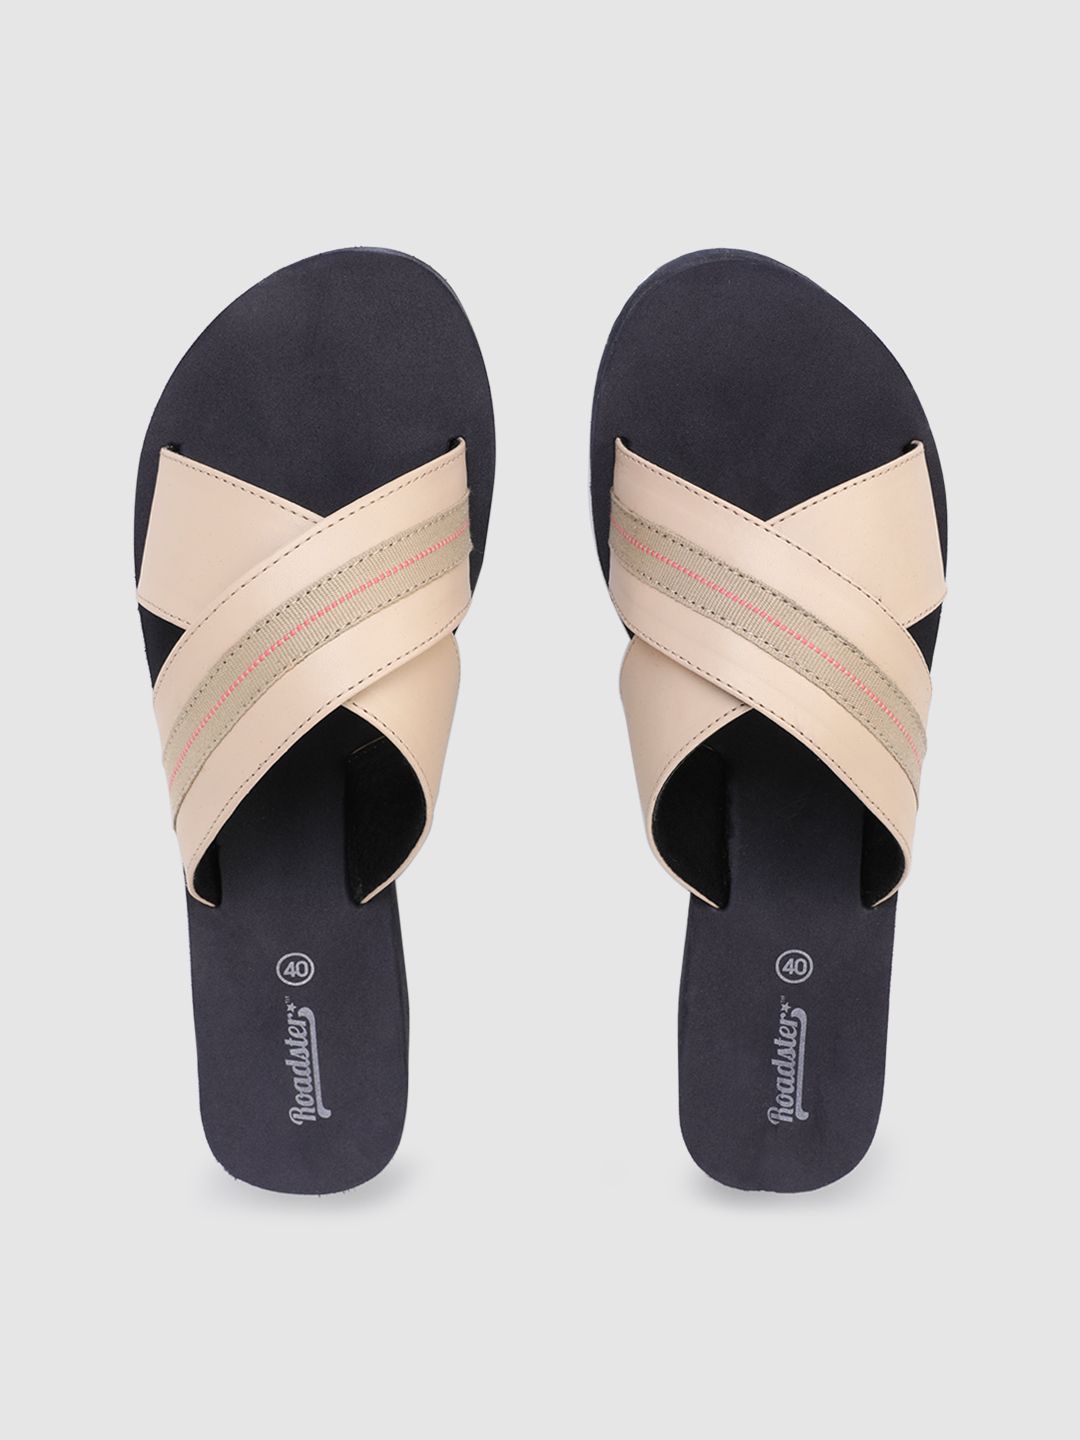 The Roadster Lifestyle Co Women Cream-Coloured Flip Flops Price in India